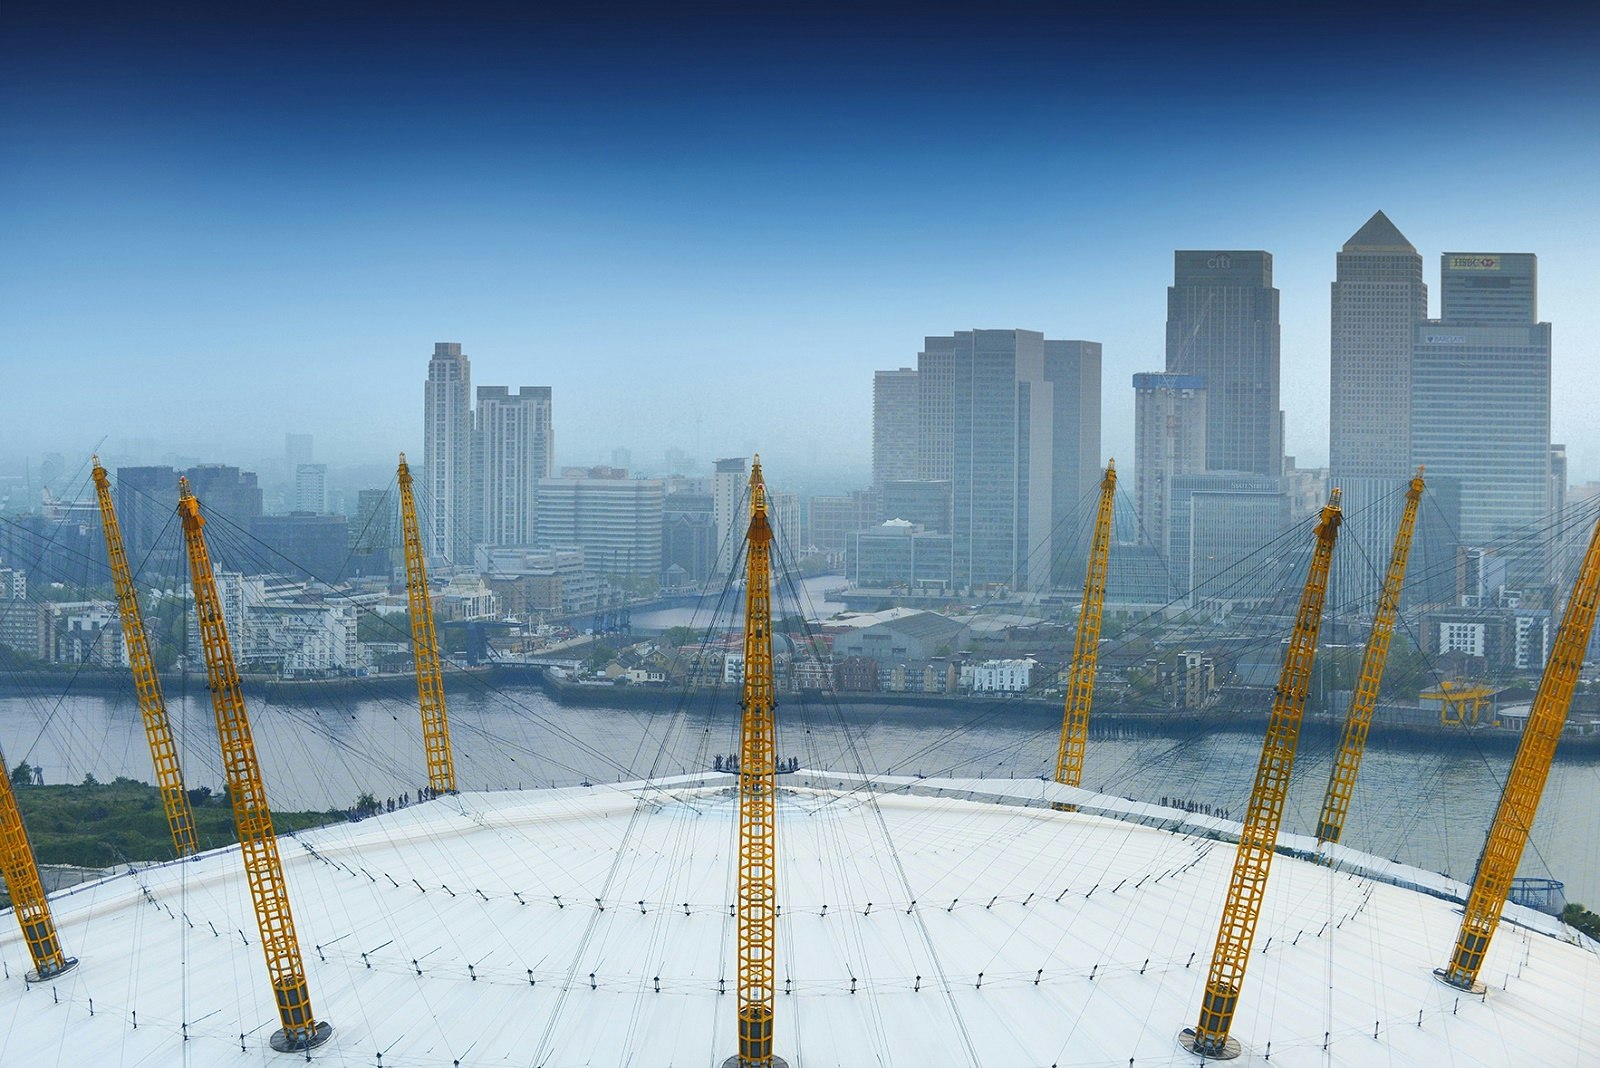 Corporate Days Out Venues in London - Up at The O2